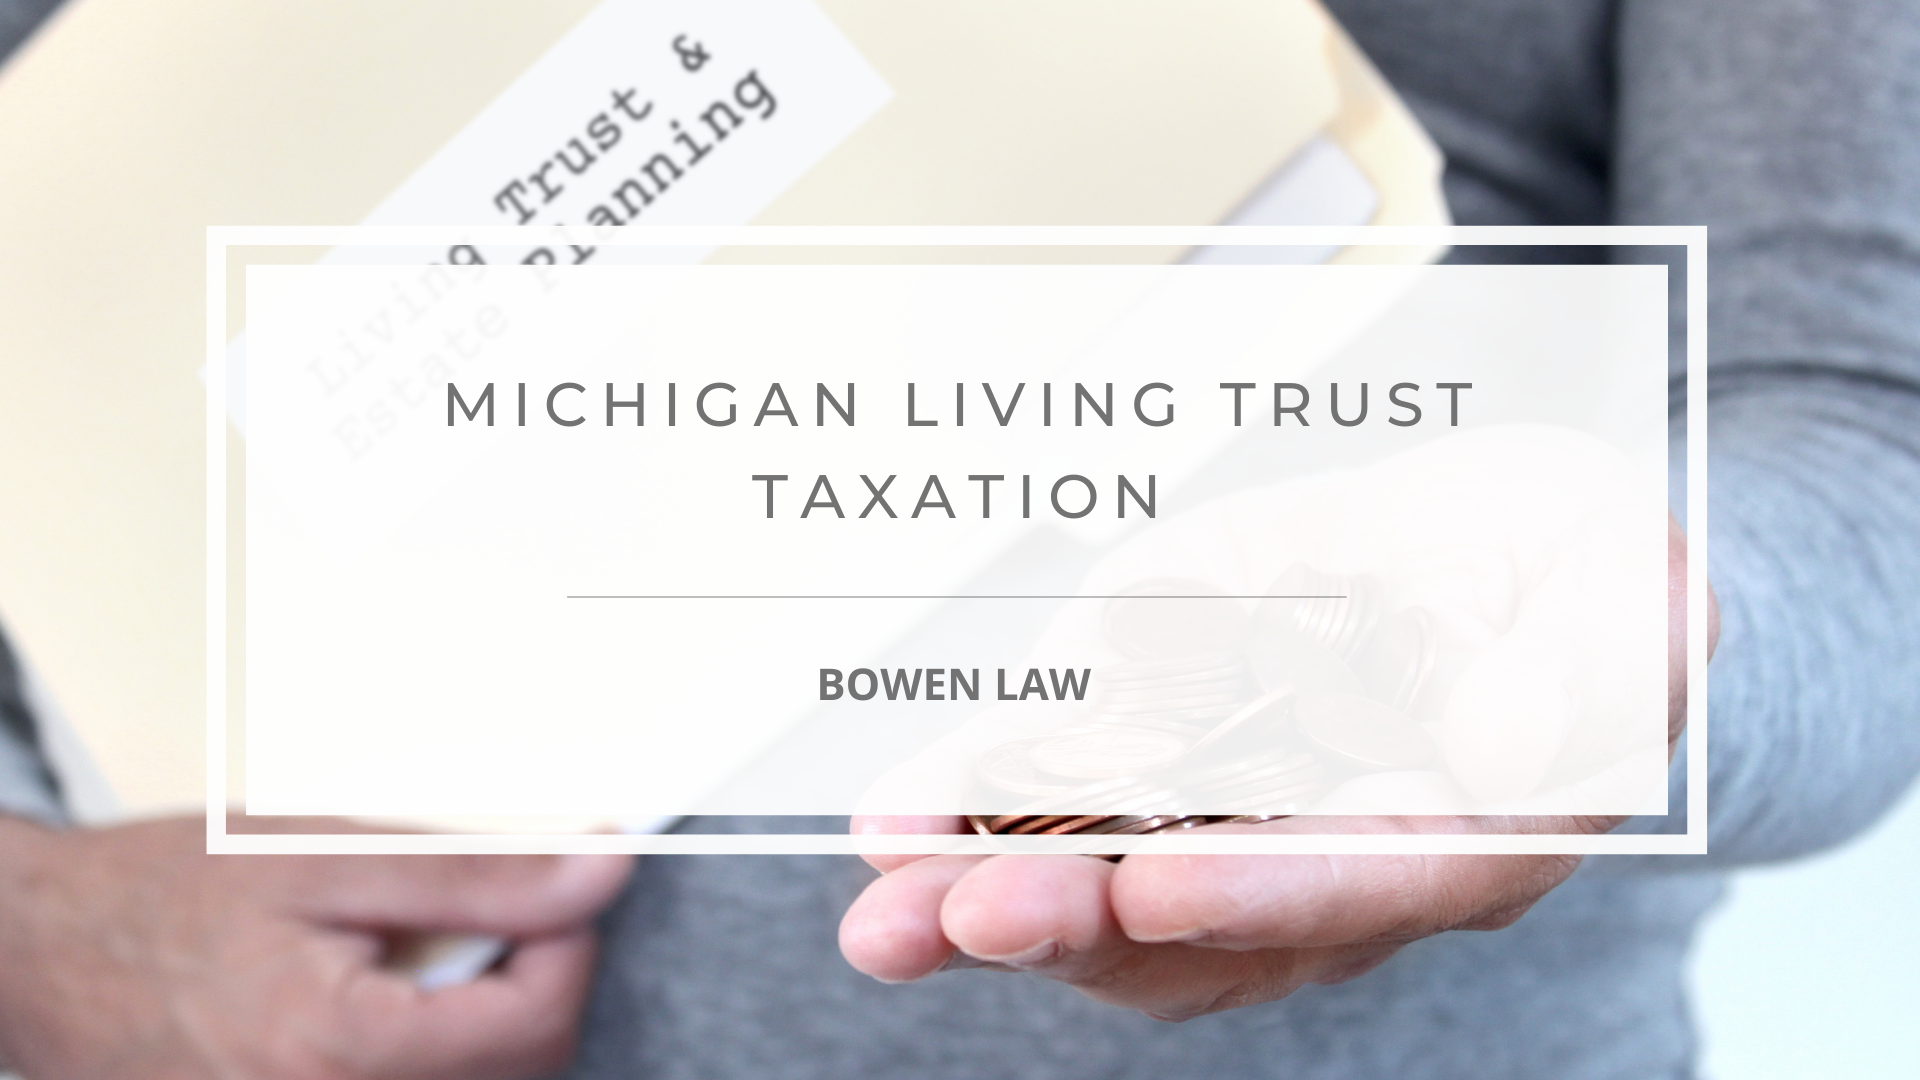 Featured image of living trust taxation